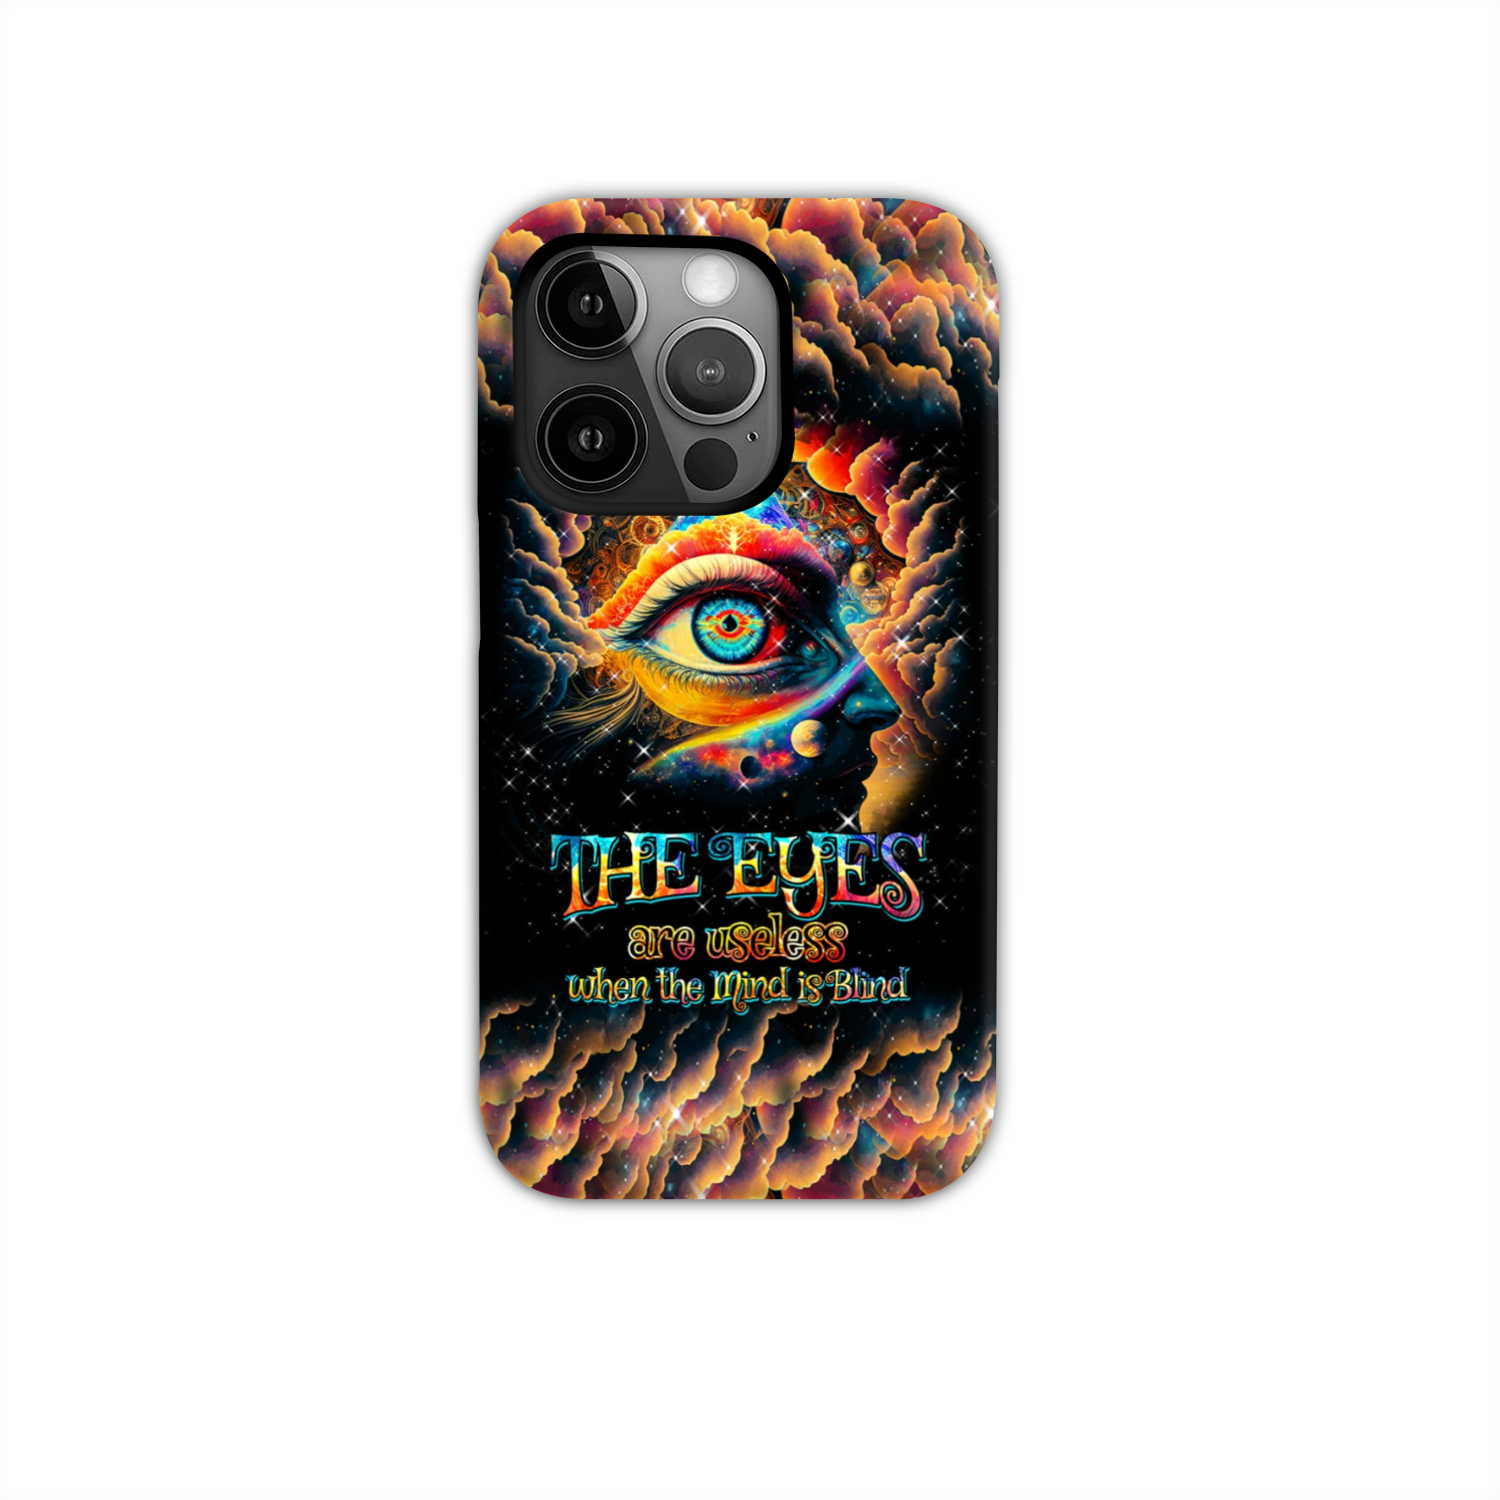 THE EYES ARE USELESS WHEN THE MIND IS BLIND PHONE CASE - TYTM2203232